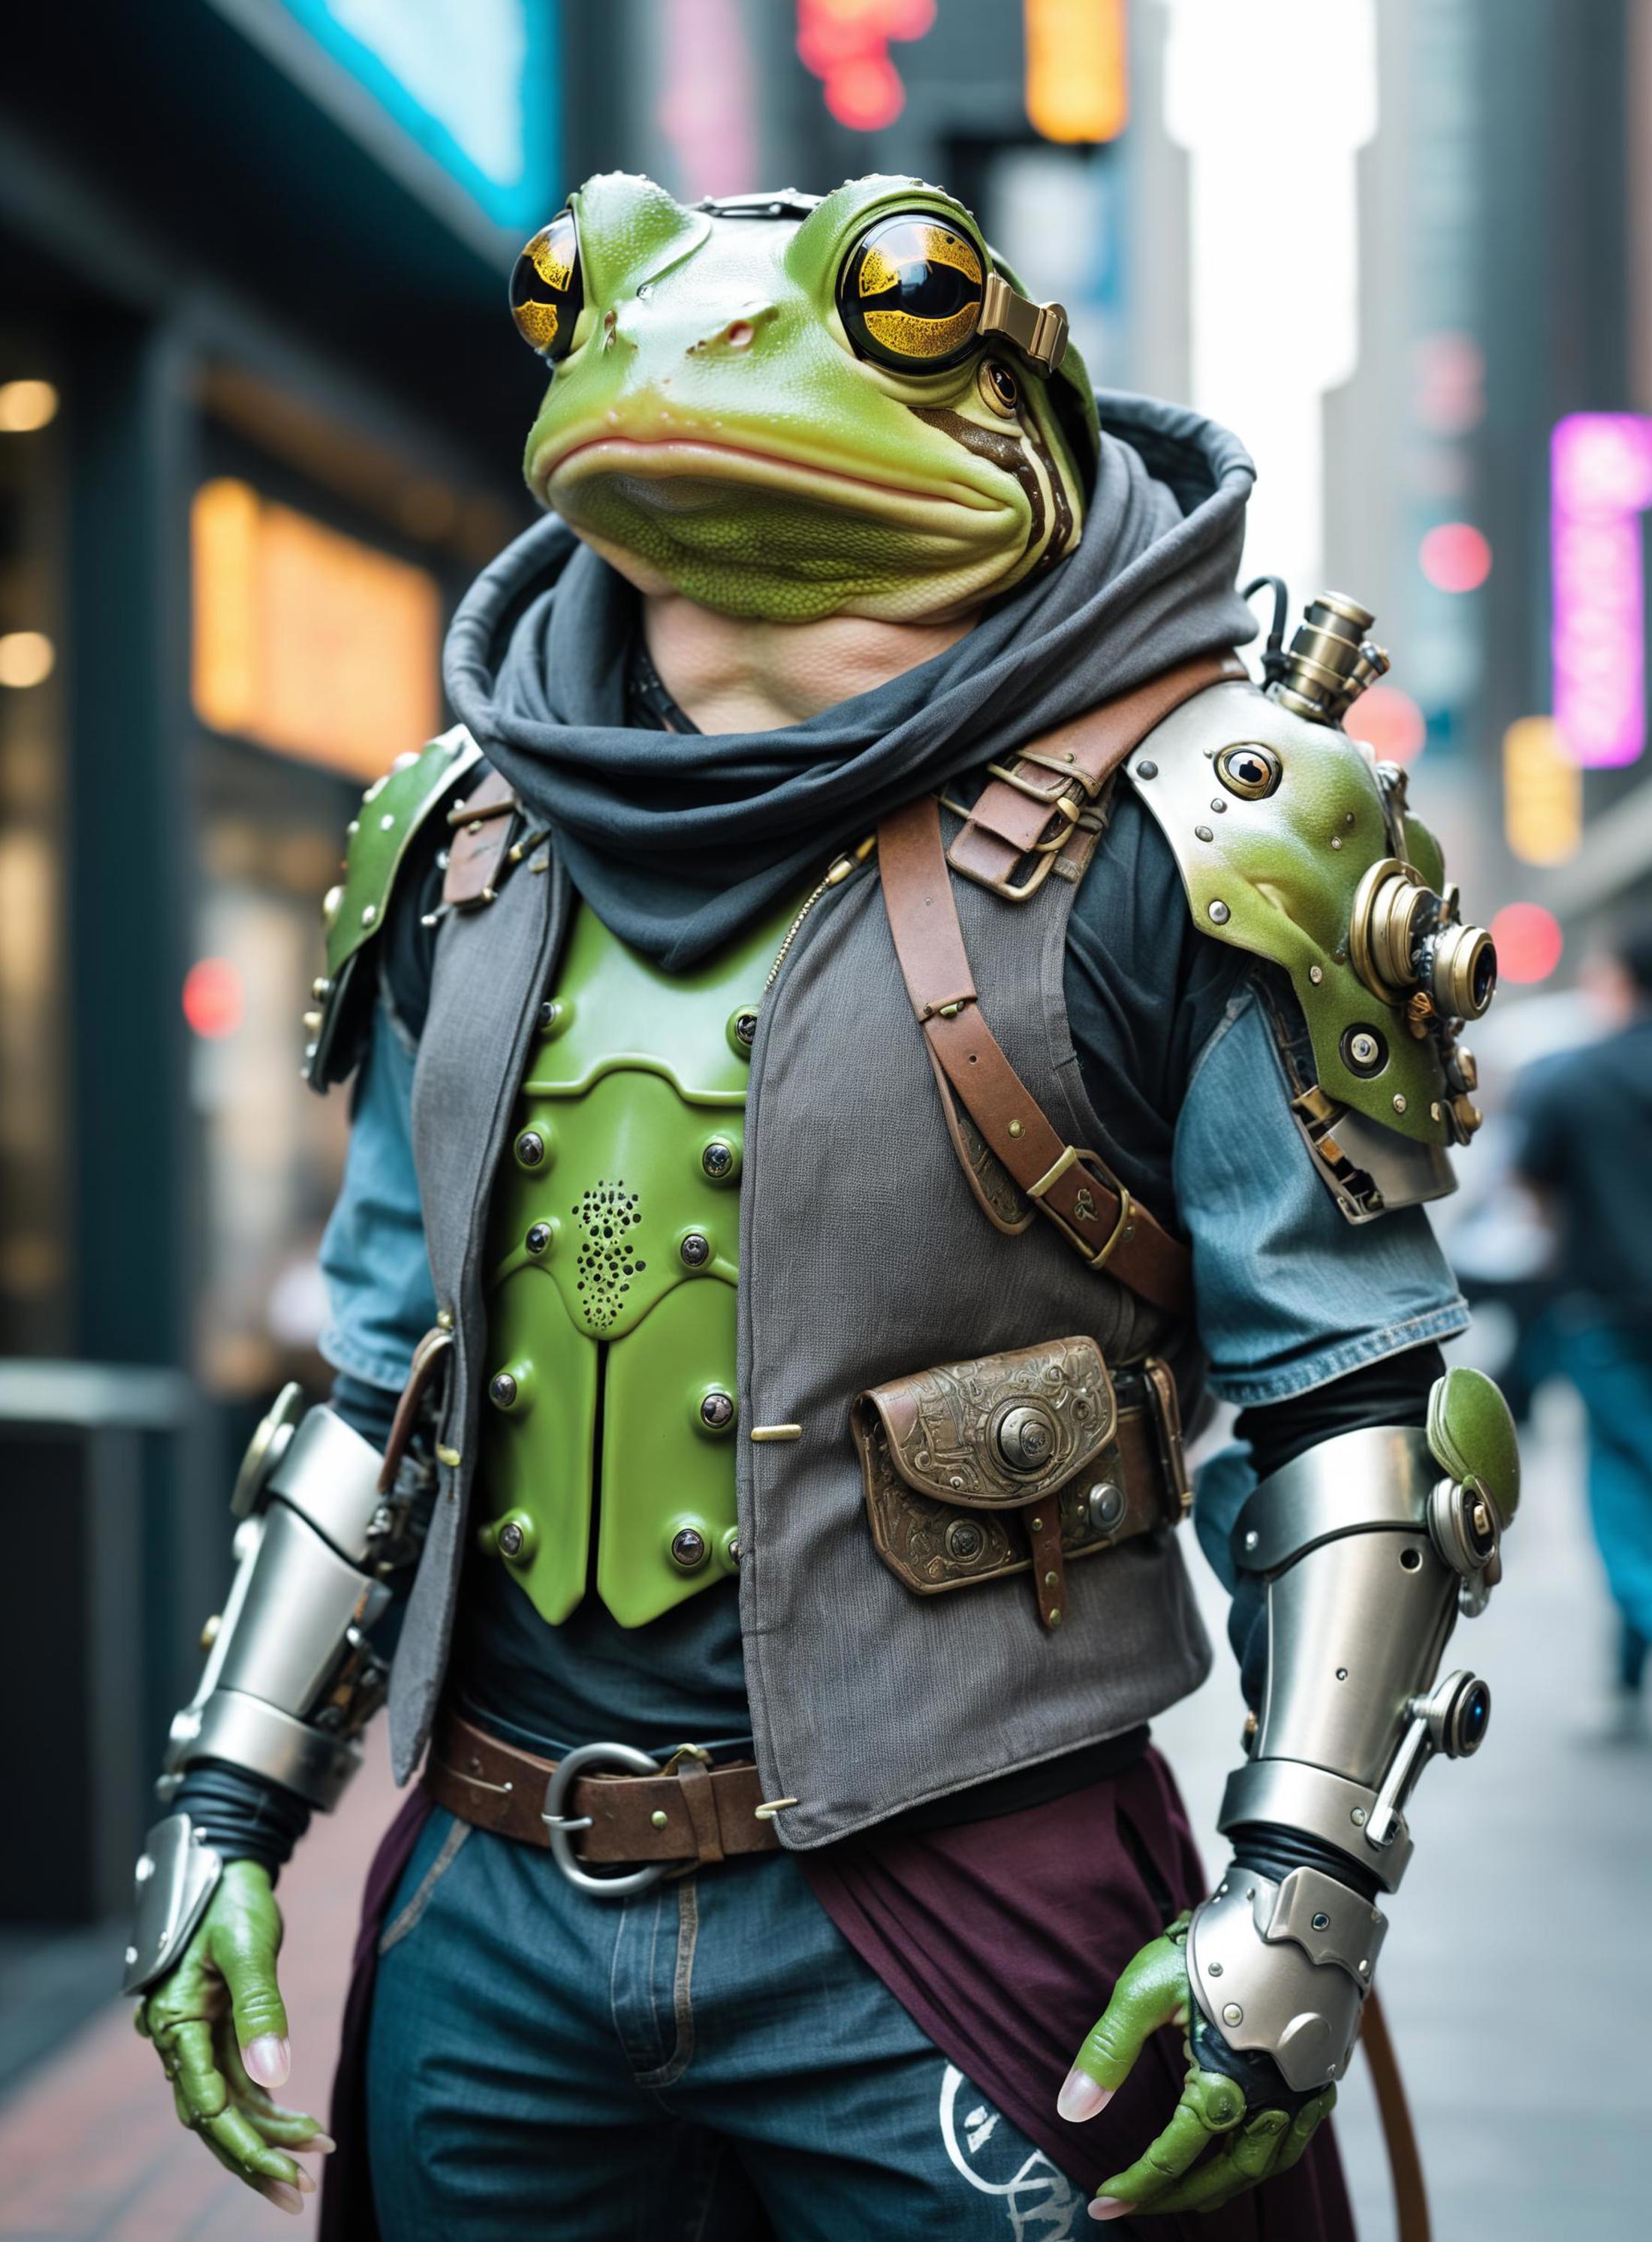 A man wearing a green and grey costume with a frog mask and a sword.